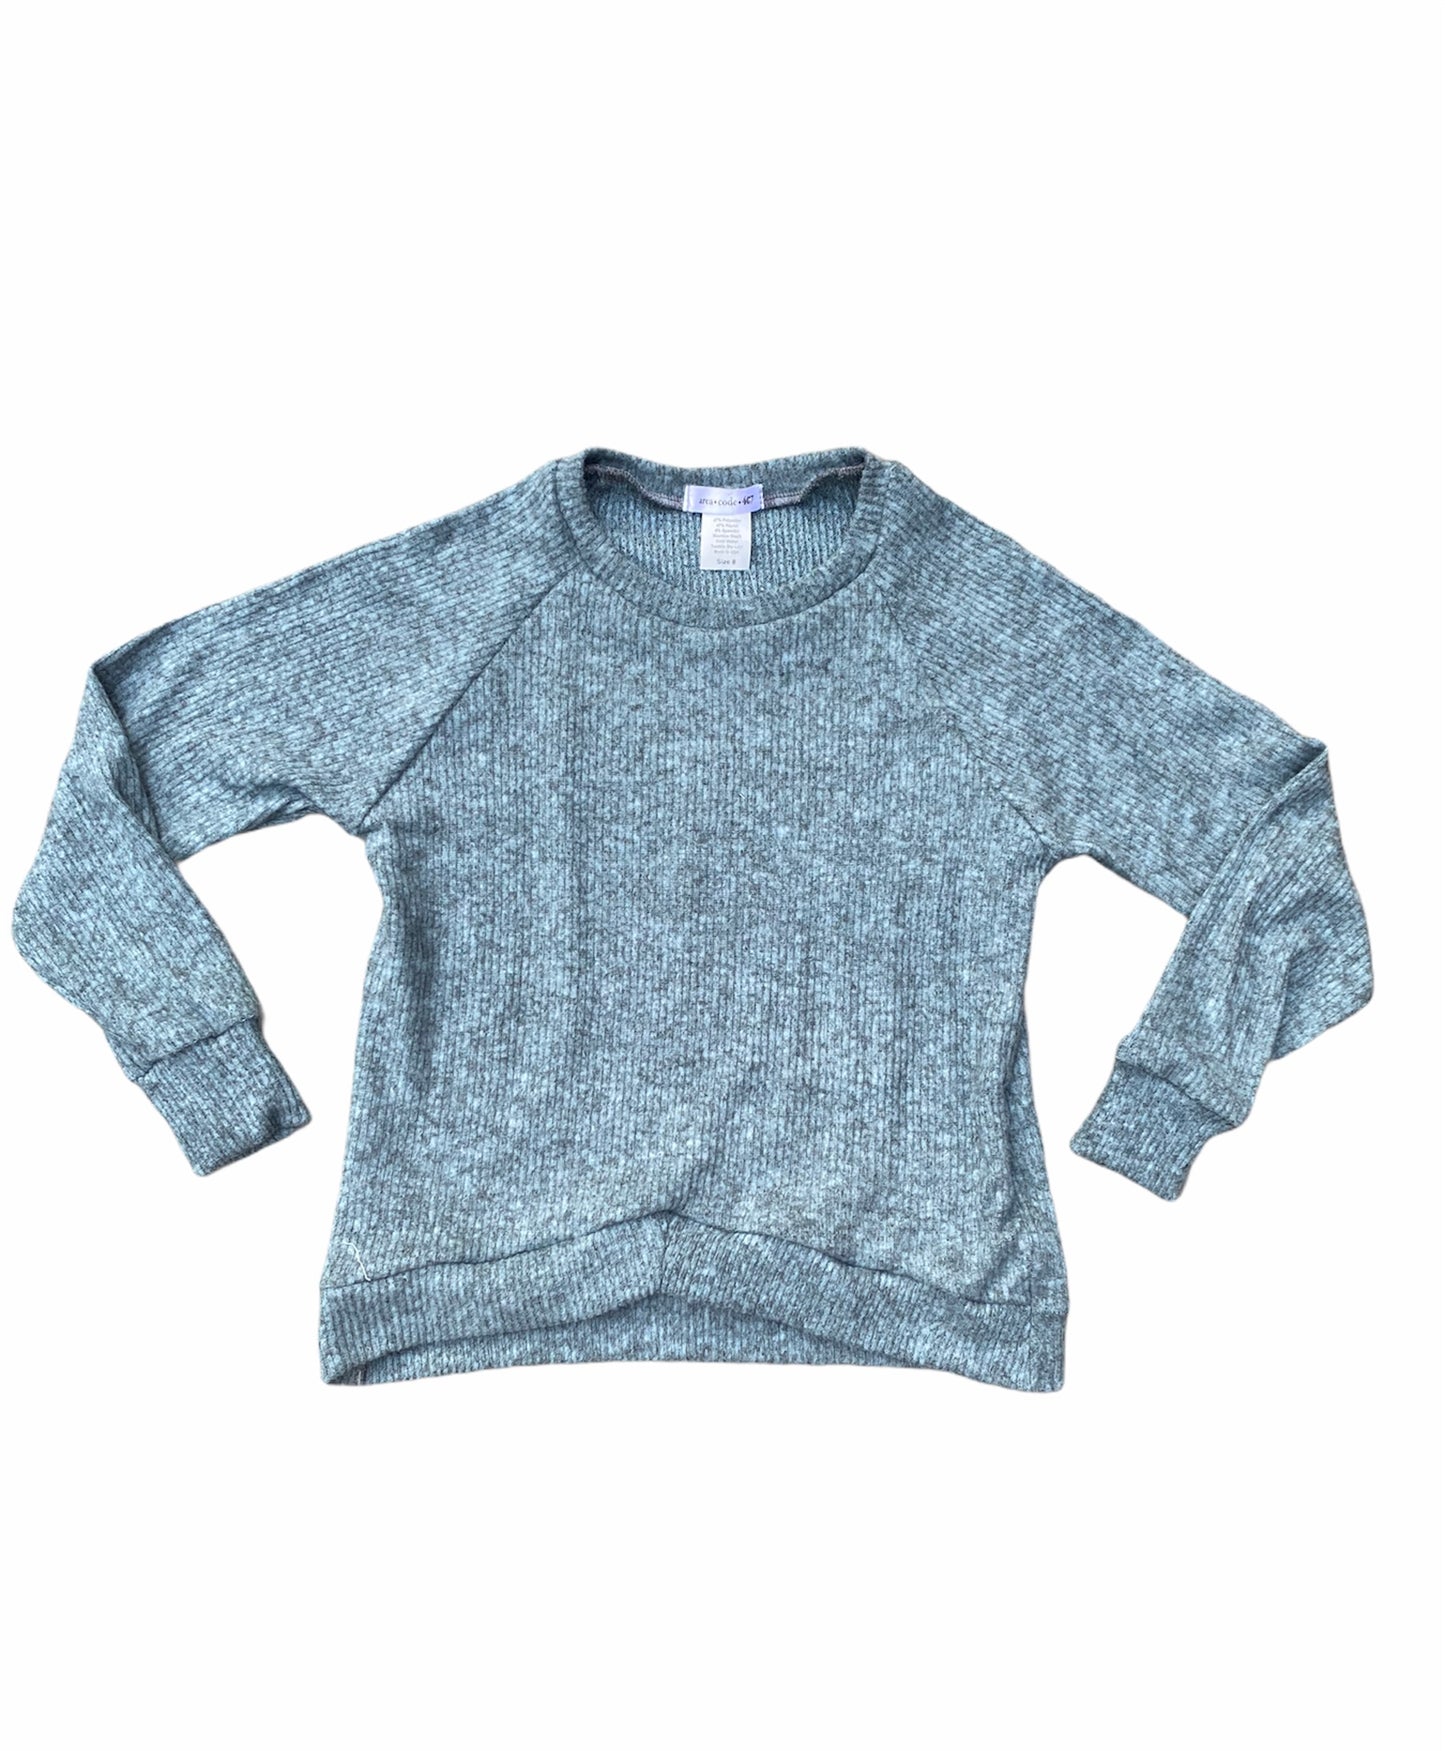 Light Teal/Grey Cheille Sweater